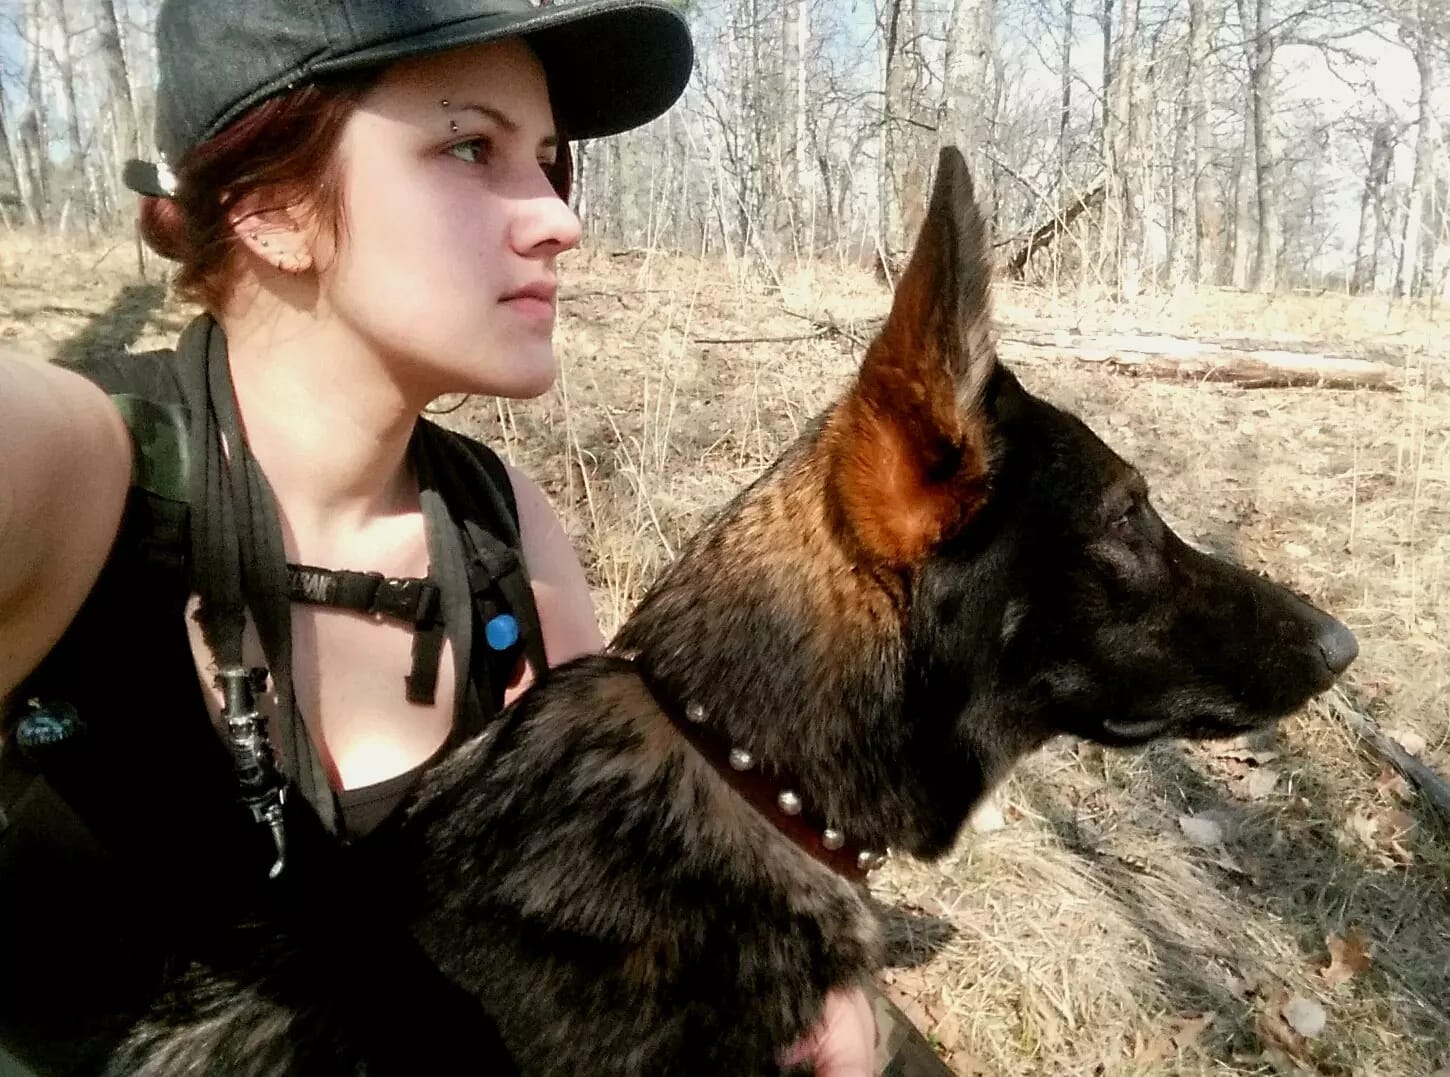 This picture makes me feel powerful. Witchcraft isn't always flowing dresses and crystals - for me, it's working with a devoted dog to find bones in the woods and reconnect with my less performative self. Let's celebrate the less traditionally "aesthetic" ways that our craft comes out.